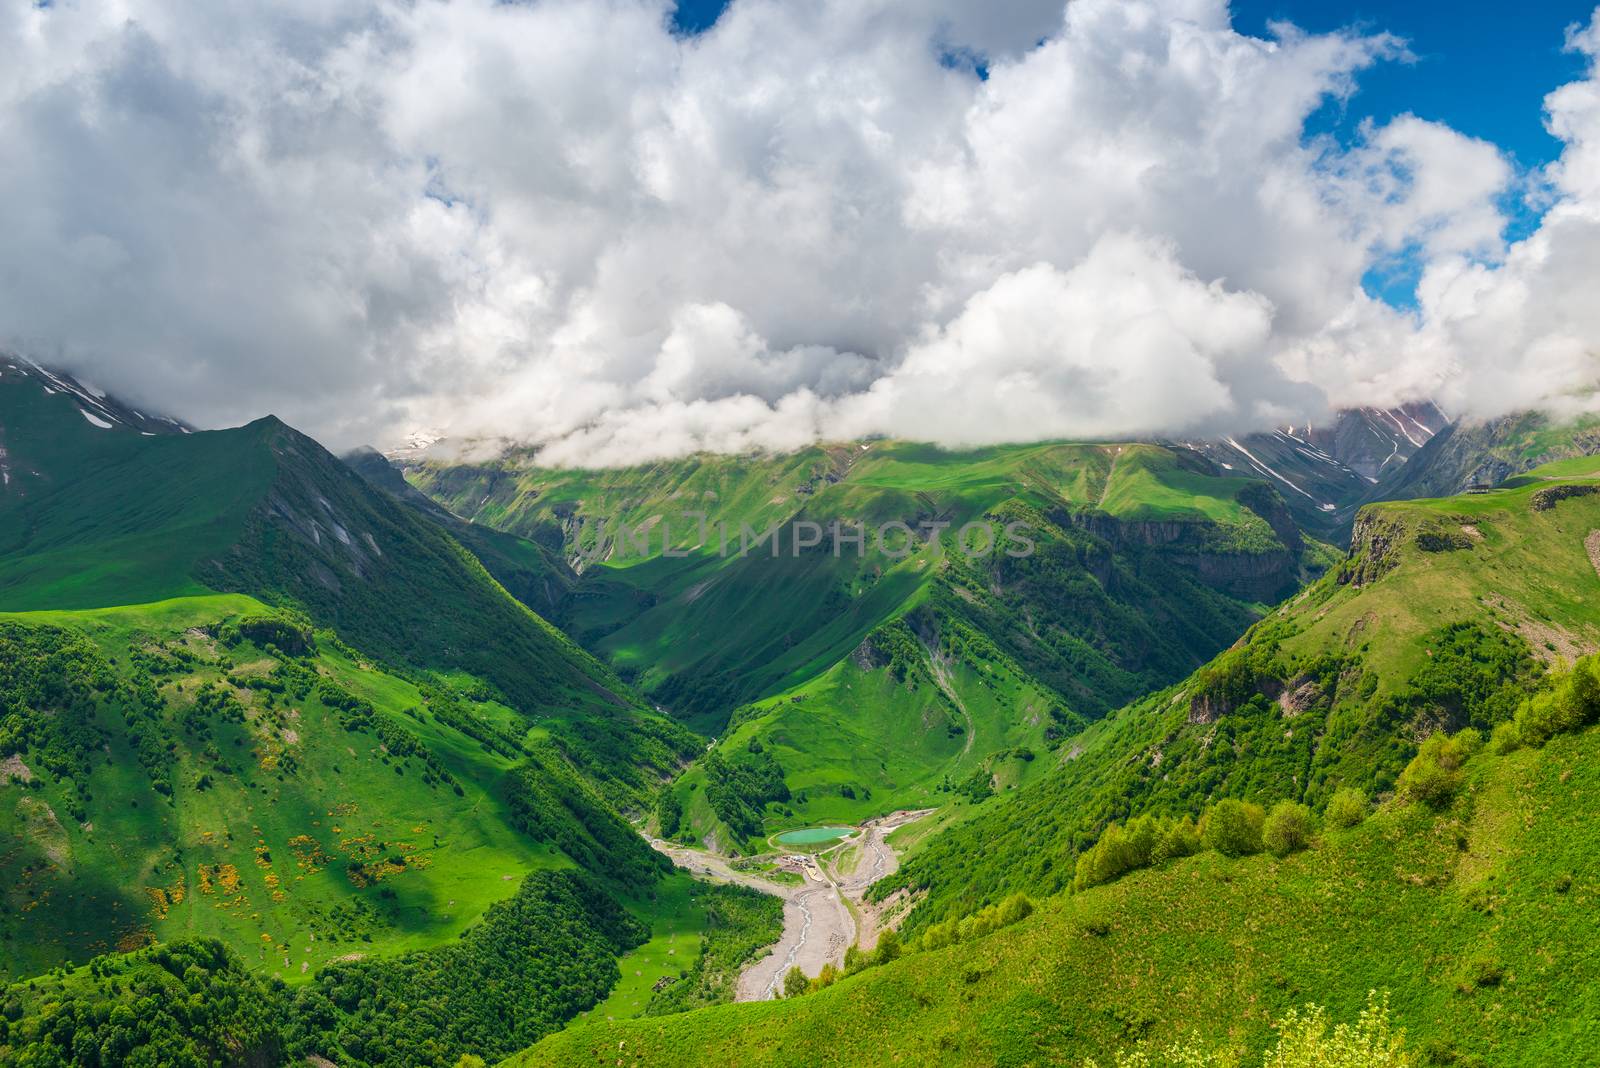 Gorge and mountain view from above, beautiful mountain landscape of the Caucasus Mountains